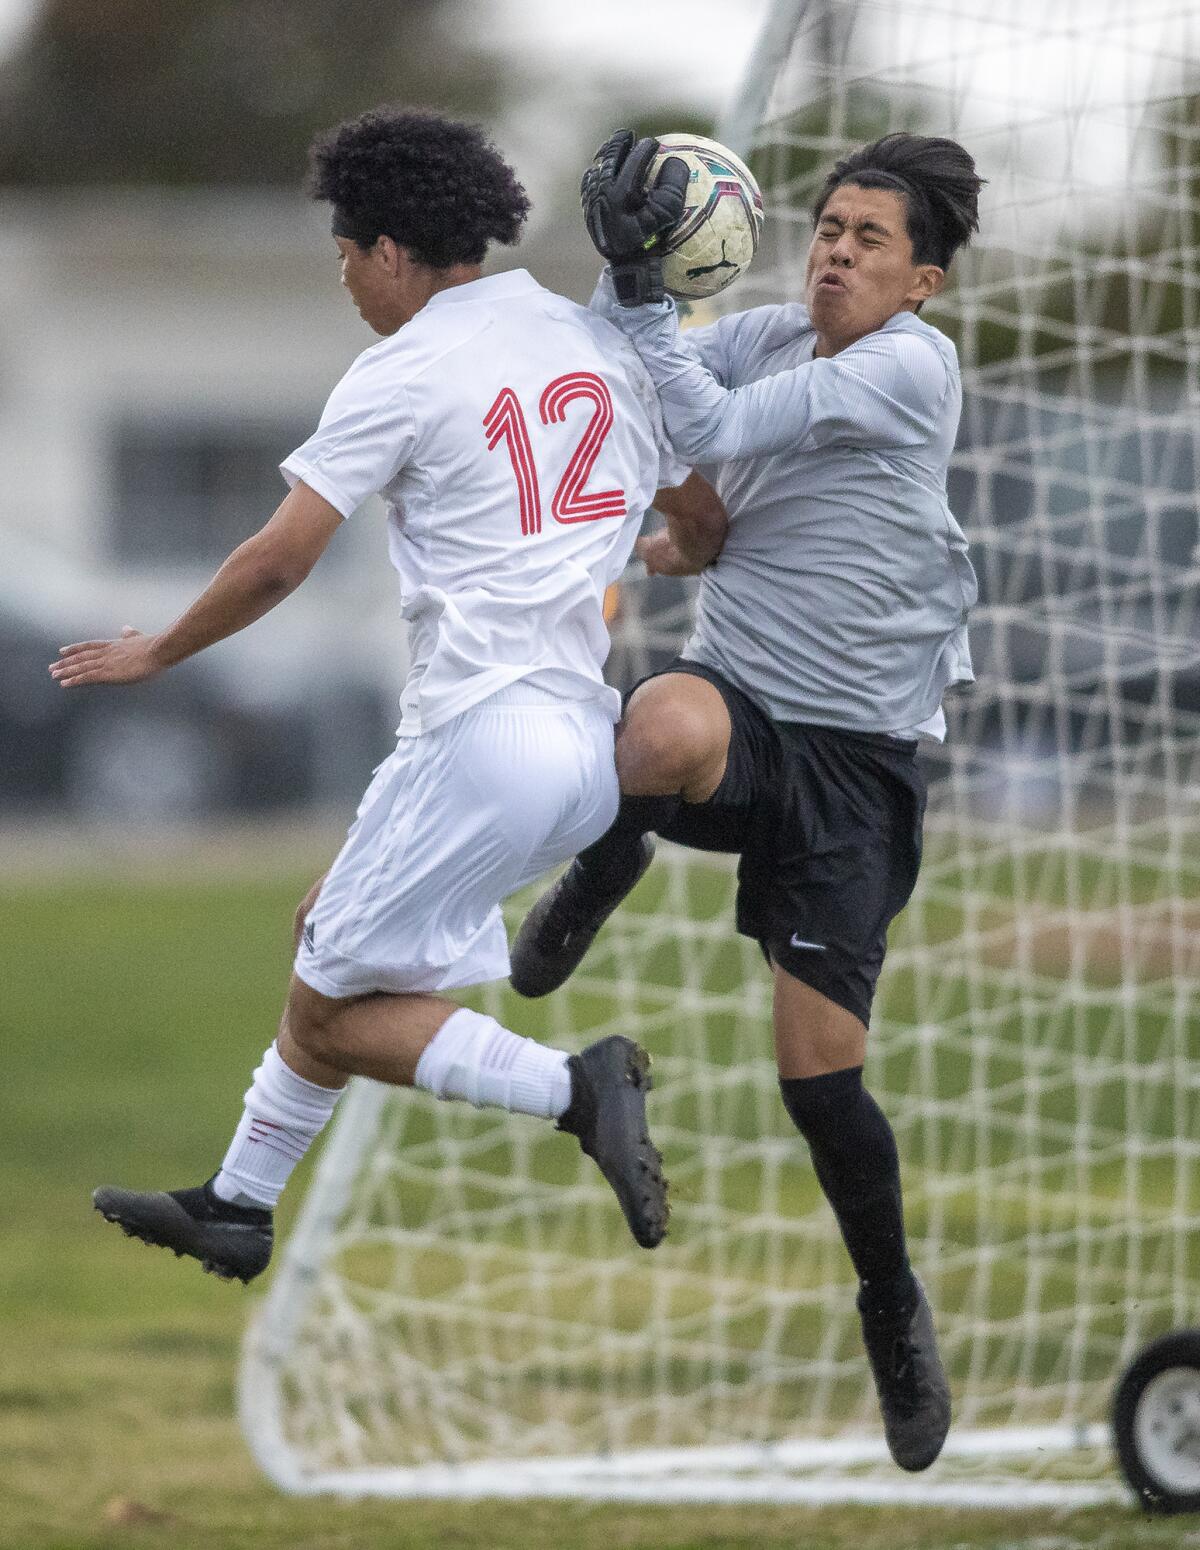 Estancia's John Uchityl goes up for a ball against Los Amigos' goalkeeper Jorge Sanchez during a nonleague match.